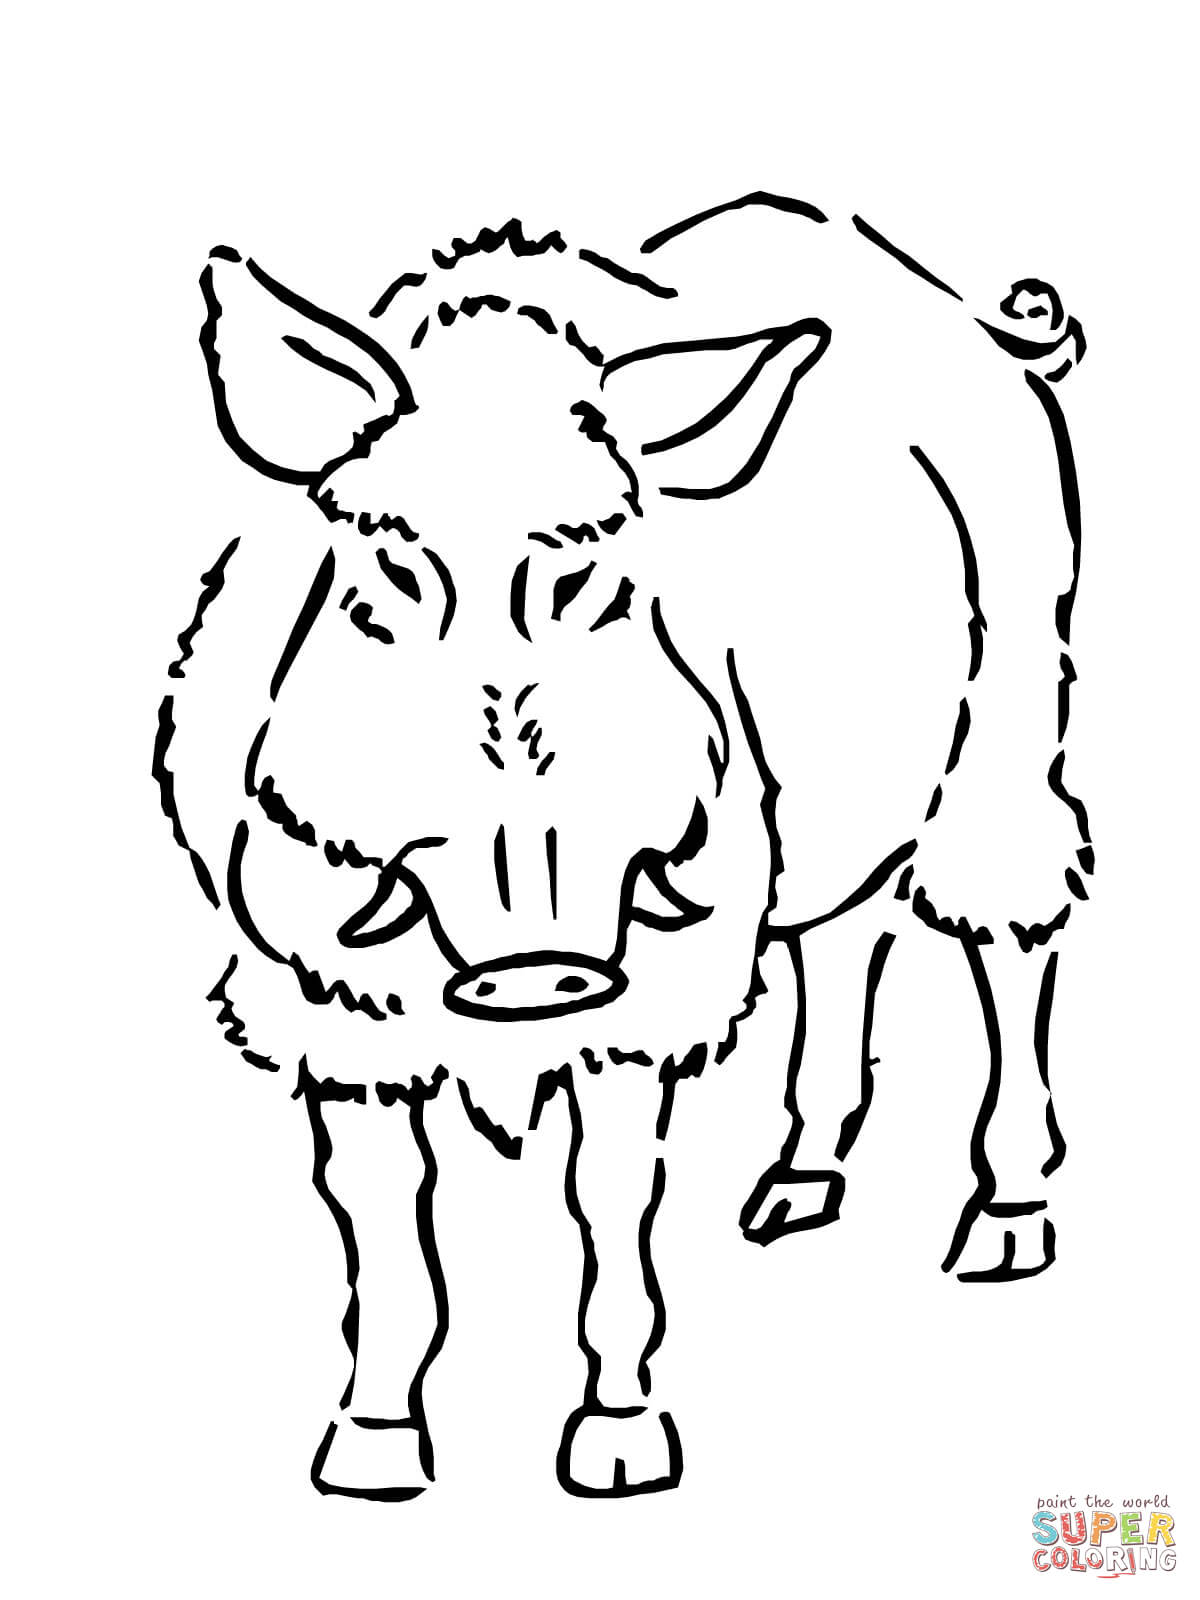 Boar coloring page | Free Printable Coloring Pages